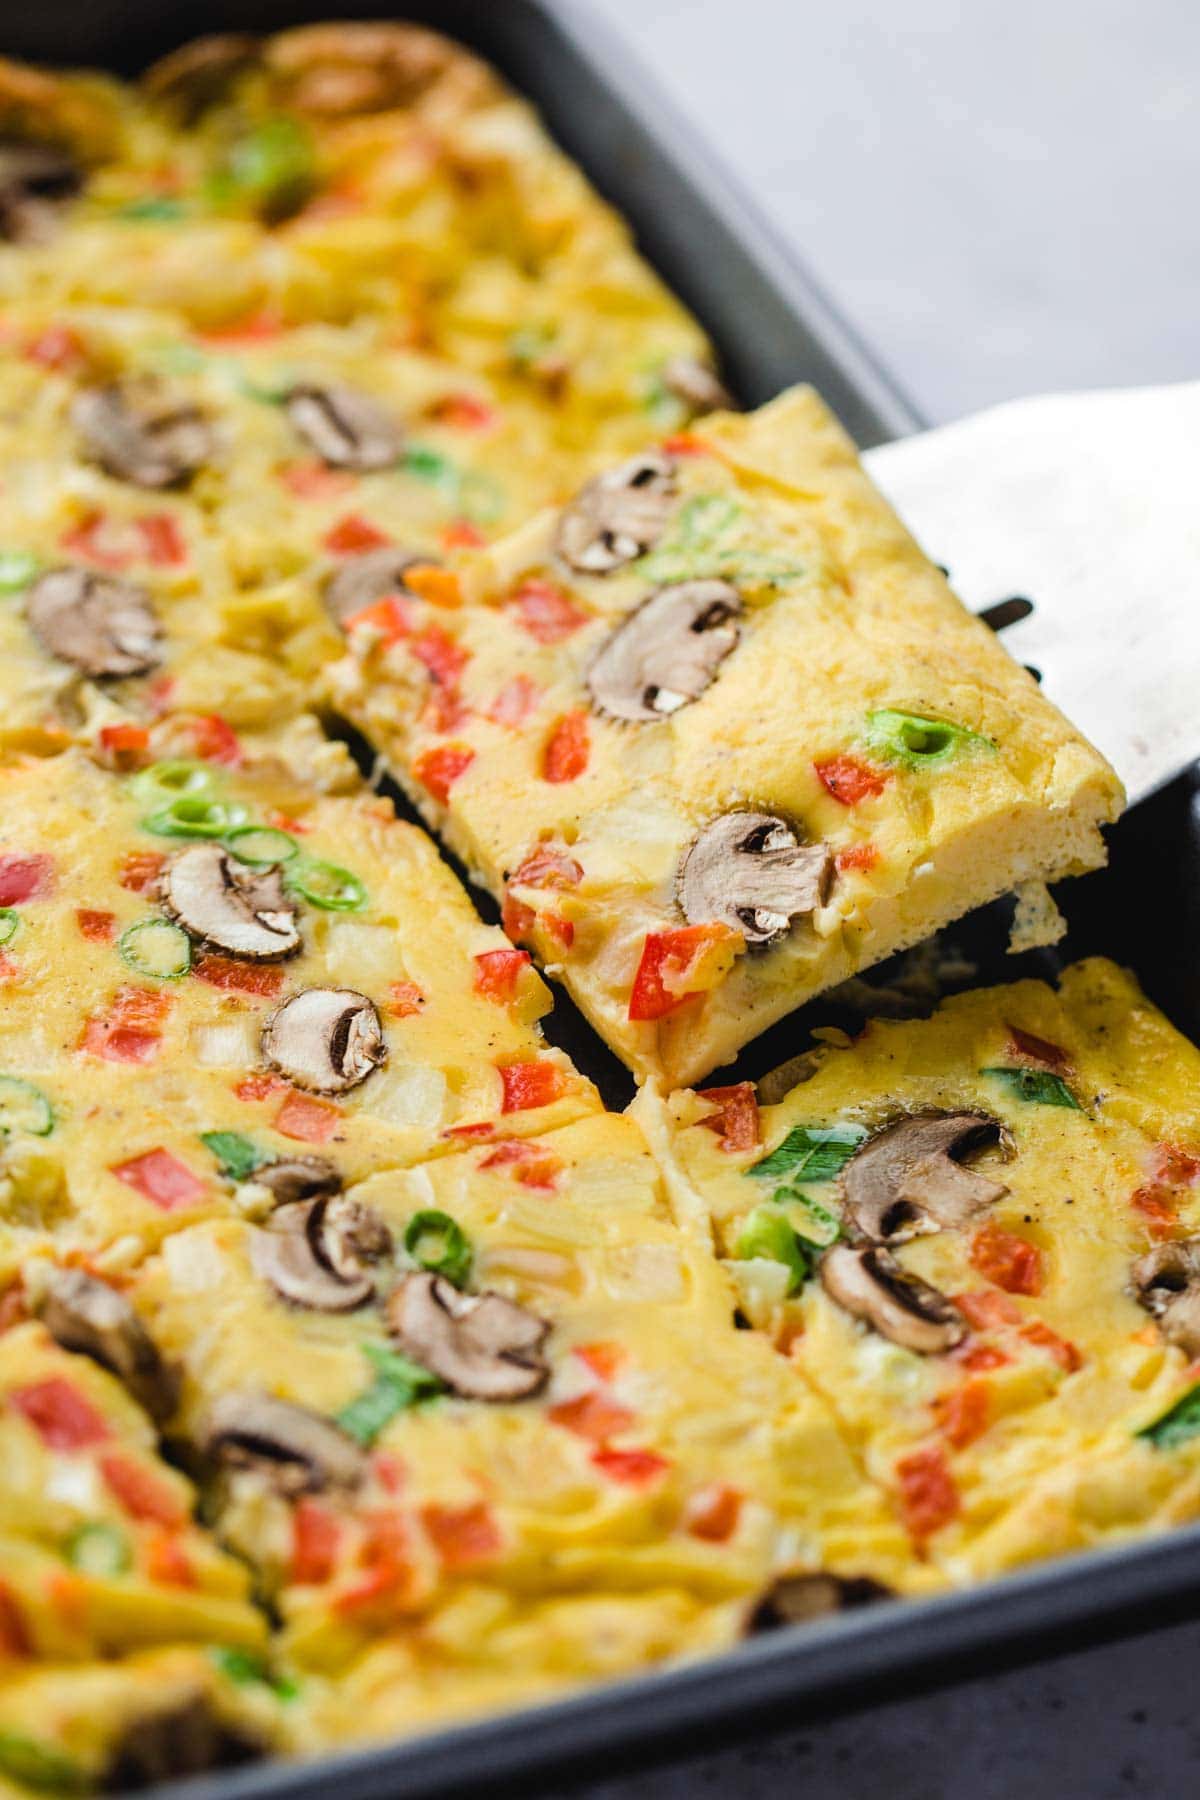 Omelet slices with mushrooms and peppers cooked in a pan.